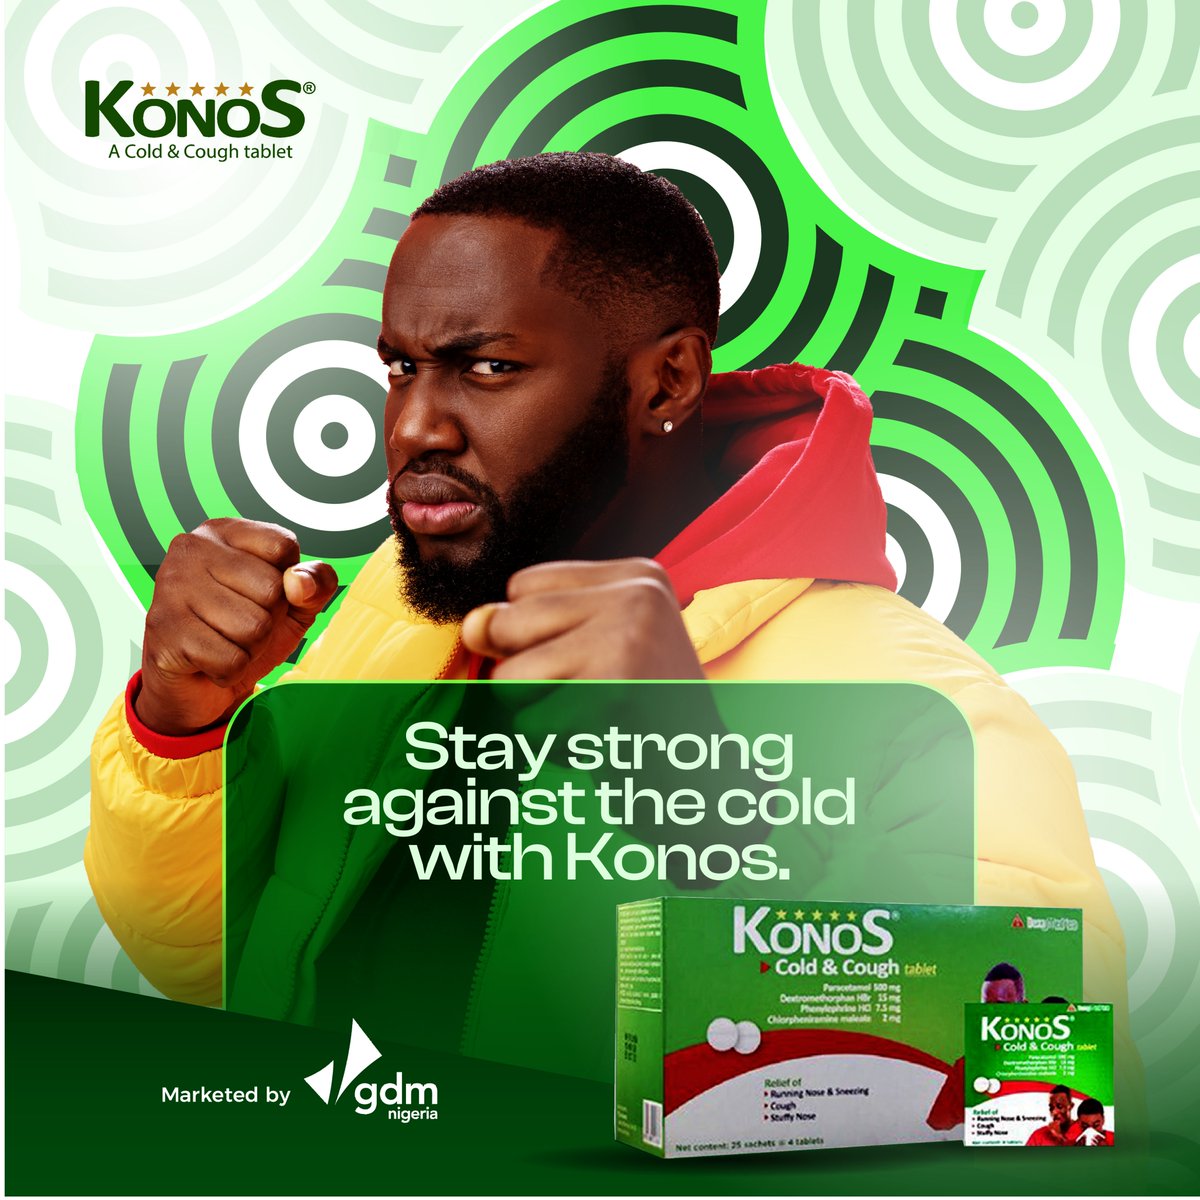 Say goodbye to cold and cough worries. Give yourself the best chance for a healthy, uninterrupted week. With Konos, you're always one step ahead!
#coldrelief #Konos #coldremedy #BreatheEasy #StayHealthy